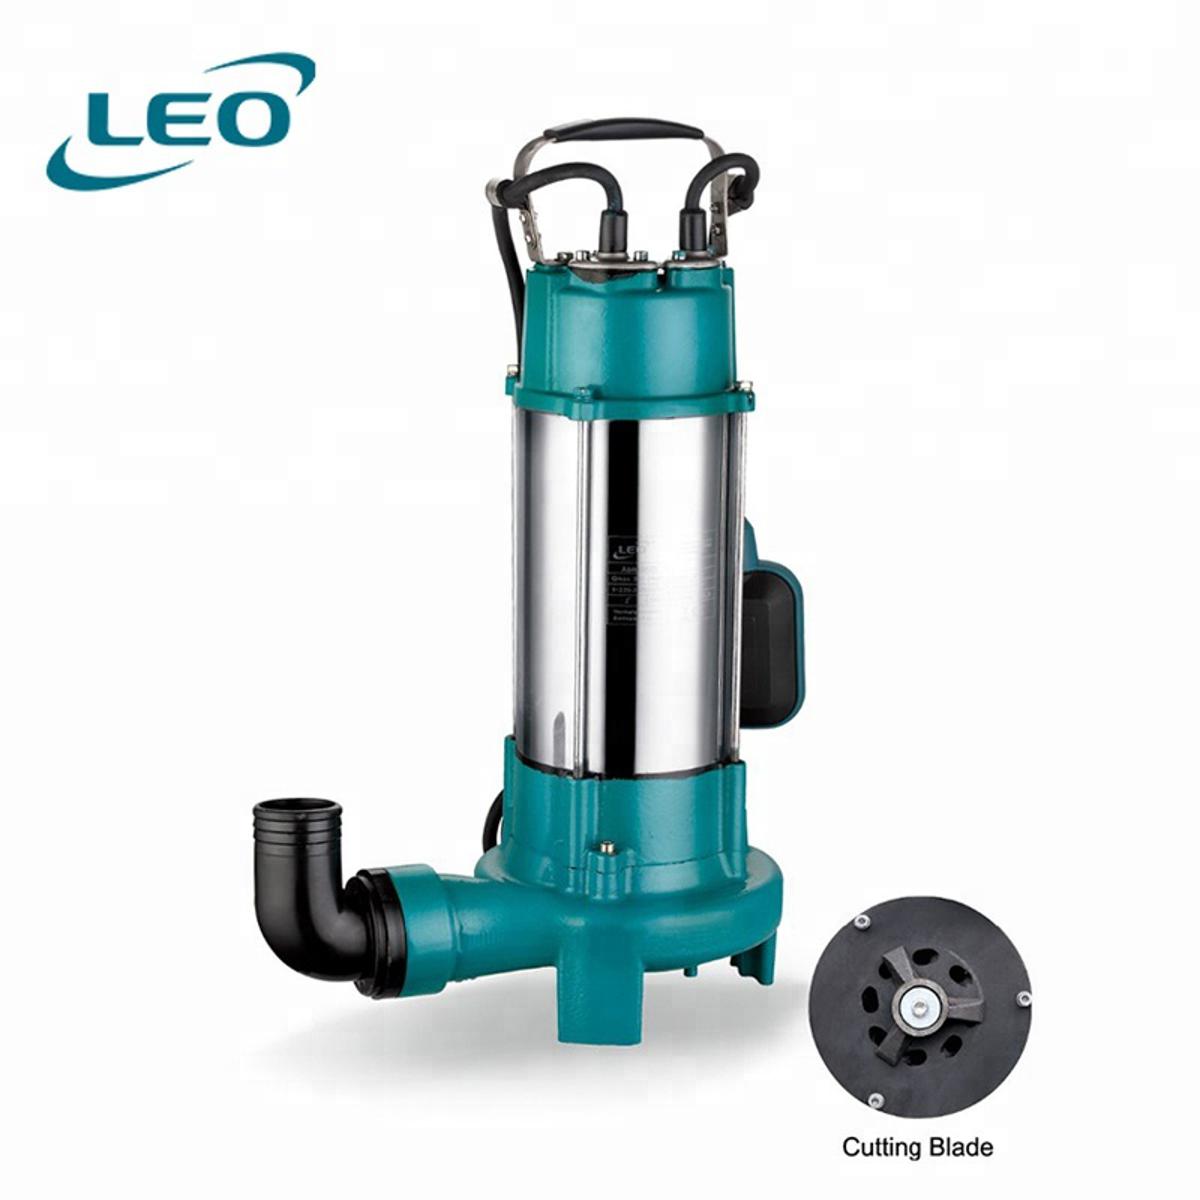 LEO - XSP-14-7-1.1D - 1100 W - 1.5 HP - Sewage Submersible Pump With CUTTER & With FLOAT SWITCH FOR AUTOMATIC OPERATION - European STANDARD